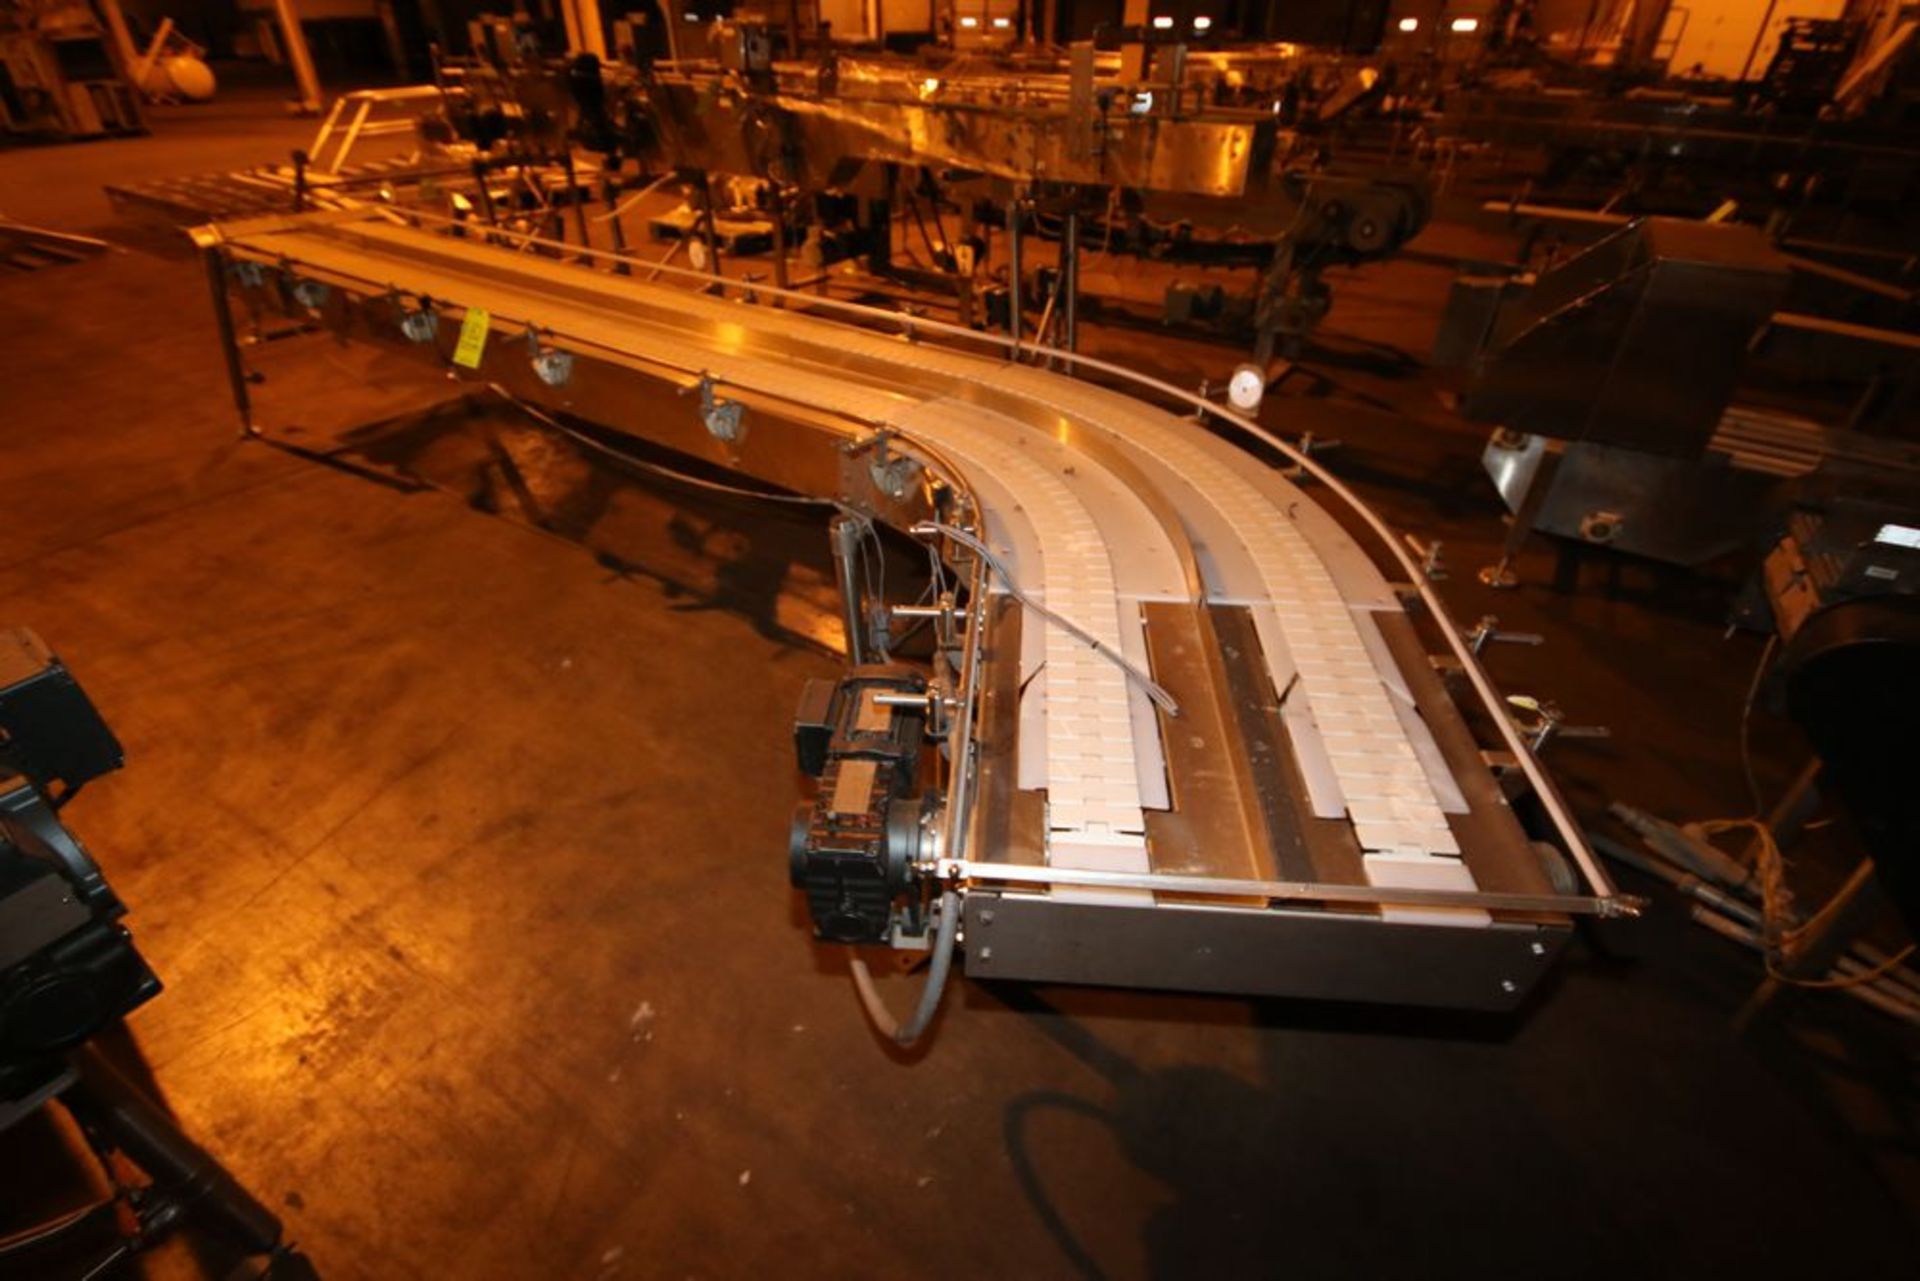 4-Sections of Sidel & Nercon 2-Lane Curved S/S Conveyor, with Drives, 1-Section Includes Dual Lane - Image 2 of 6